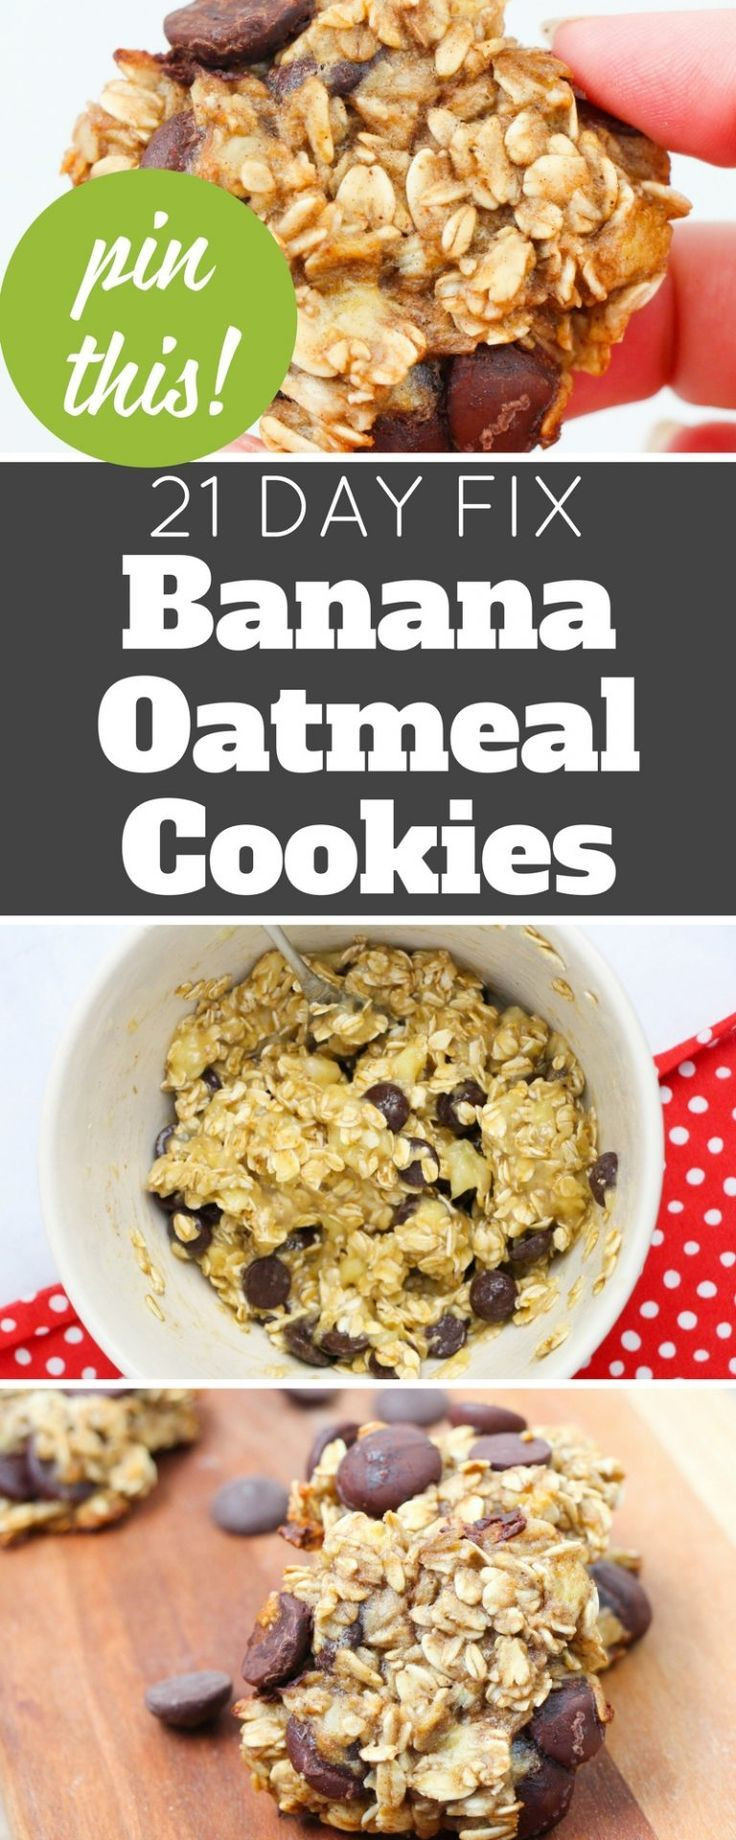 Healthy Oatmeal Cookies No Flour
 These banana oatmeal cookies are a healthier dessert No